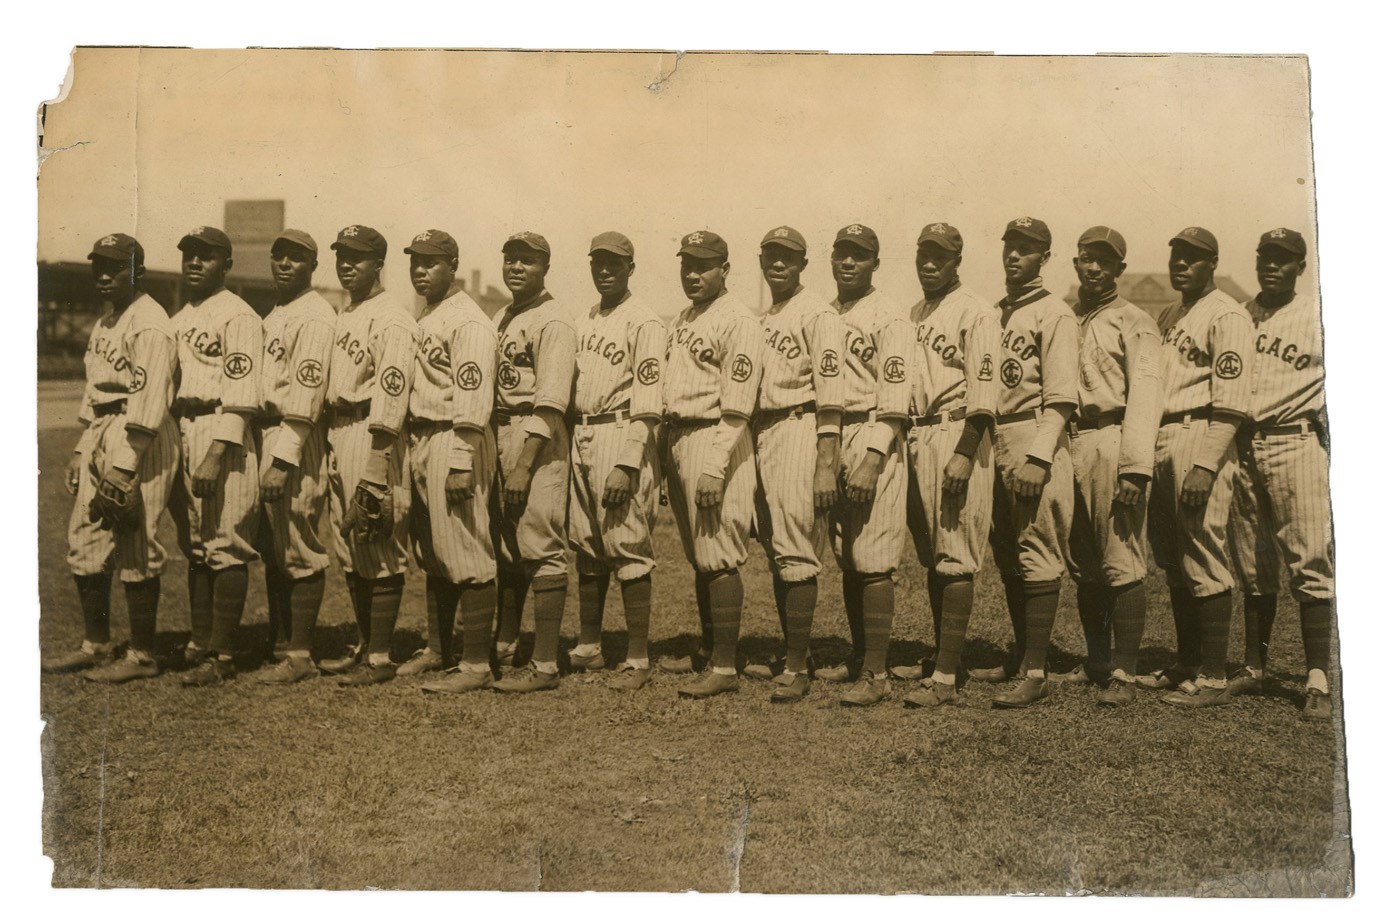 - 1921 National League Champion Chicago American Giants Type I Photograph with Cristobal Torriente (from Rube Foster Family)